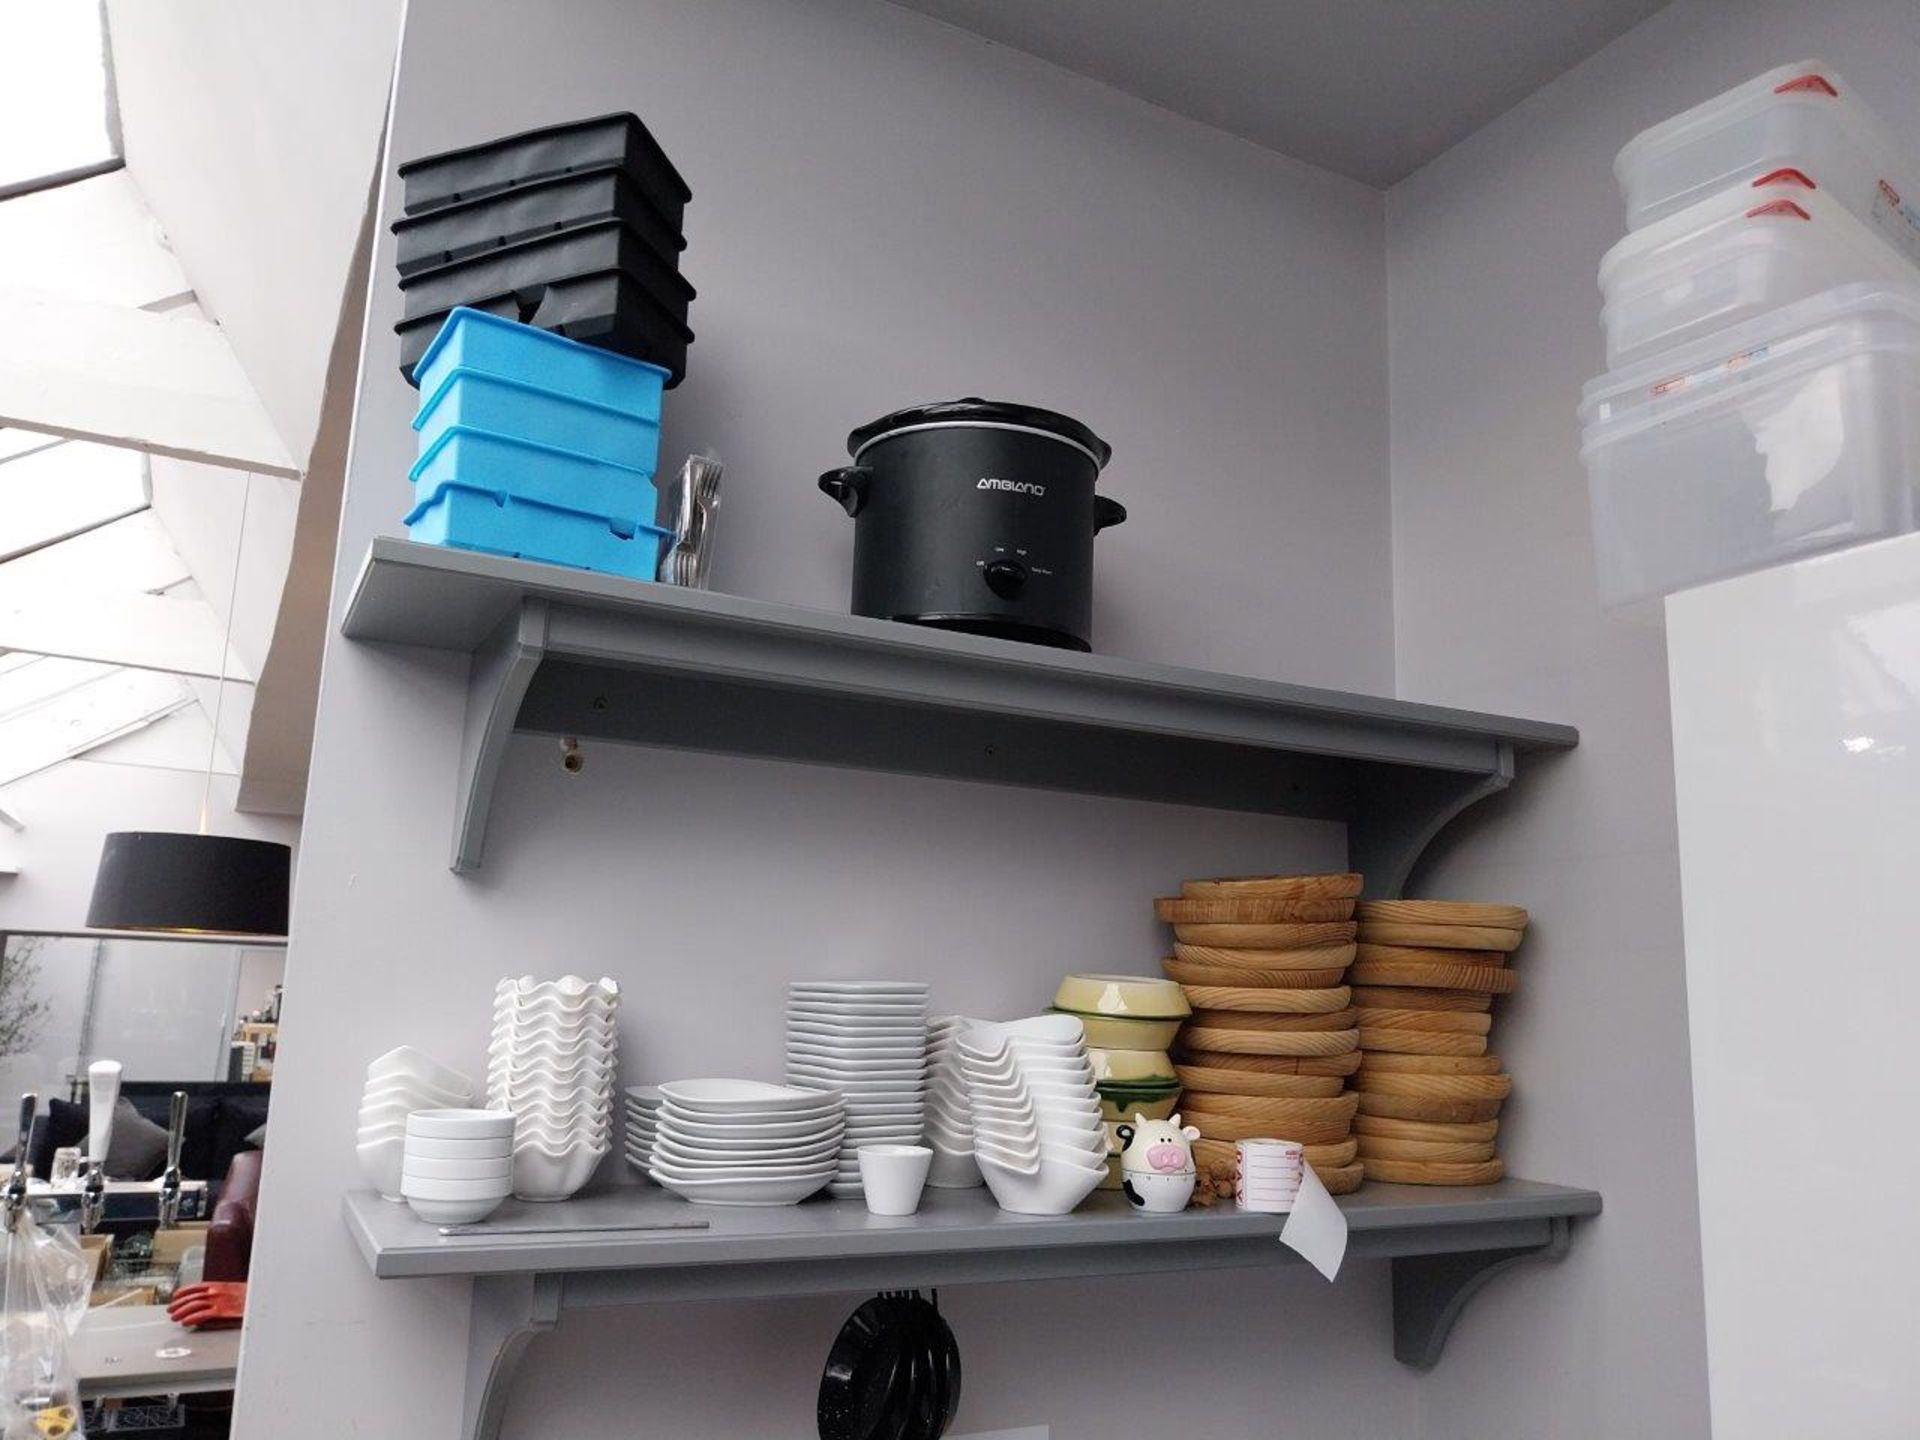 6 Tier Boltless Rack and Quantity of Crockery including Pans, Plates, Bowls, Cups, Ramakins, Trays - Image 5 of 6